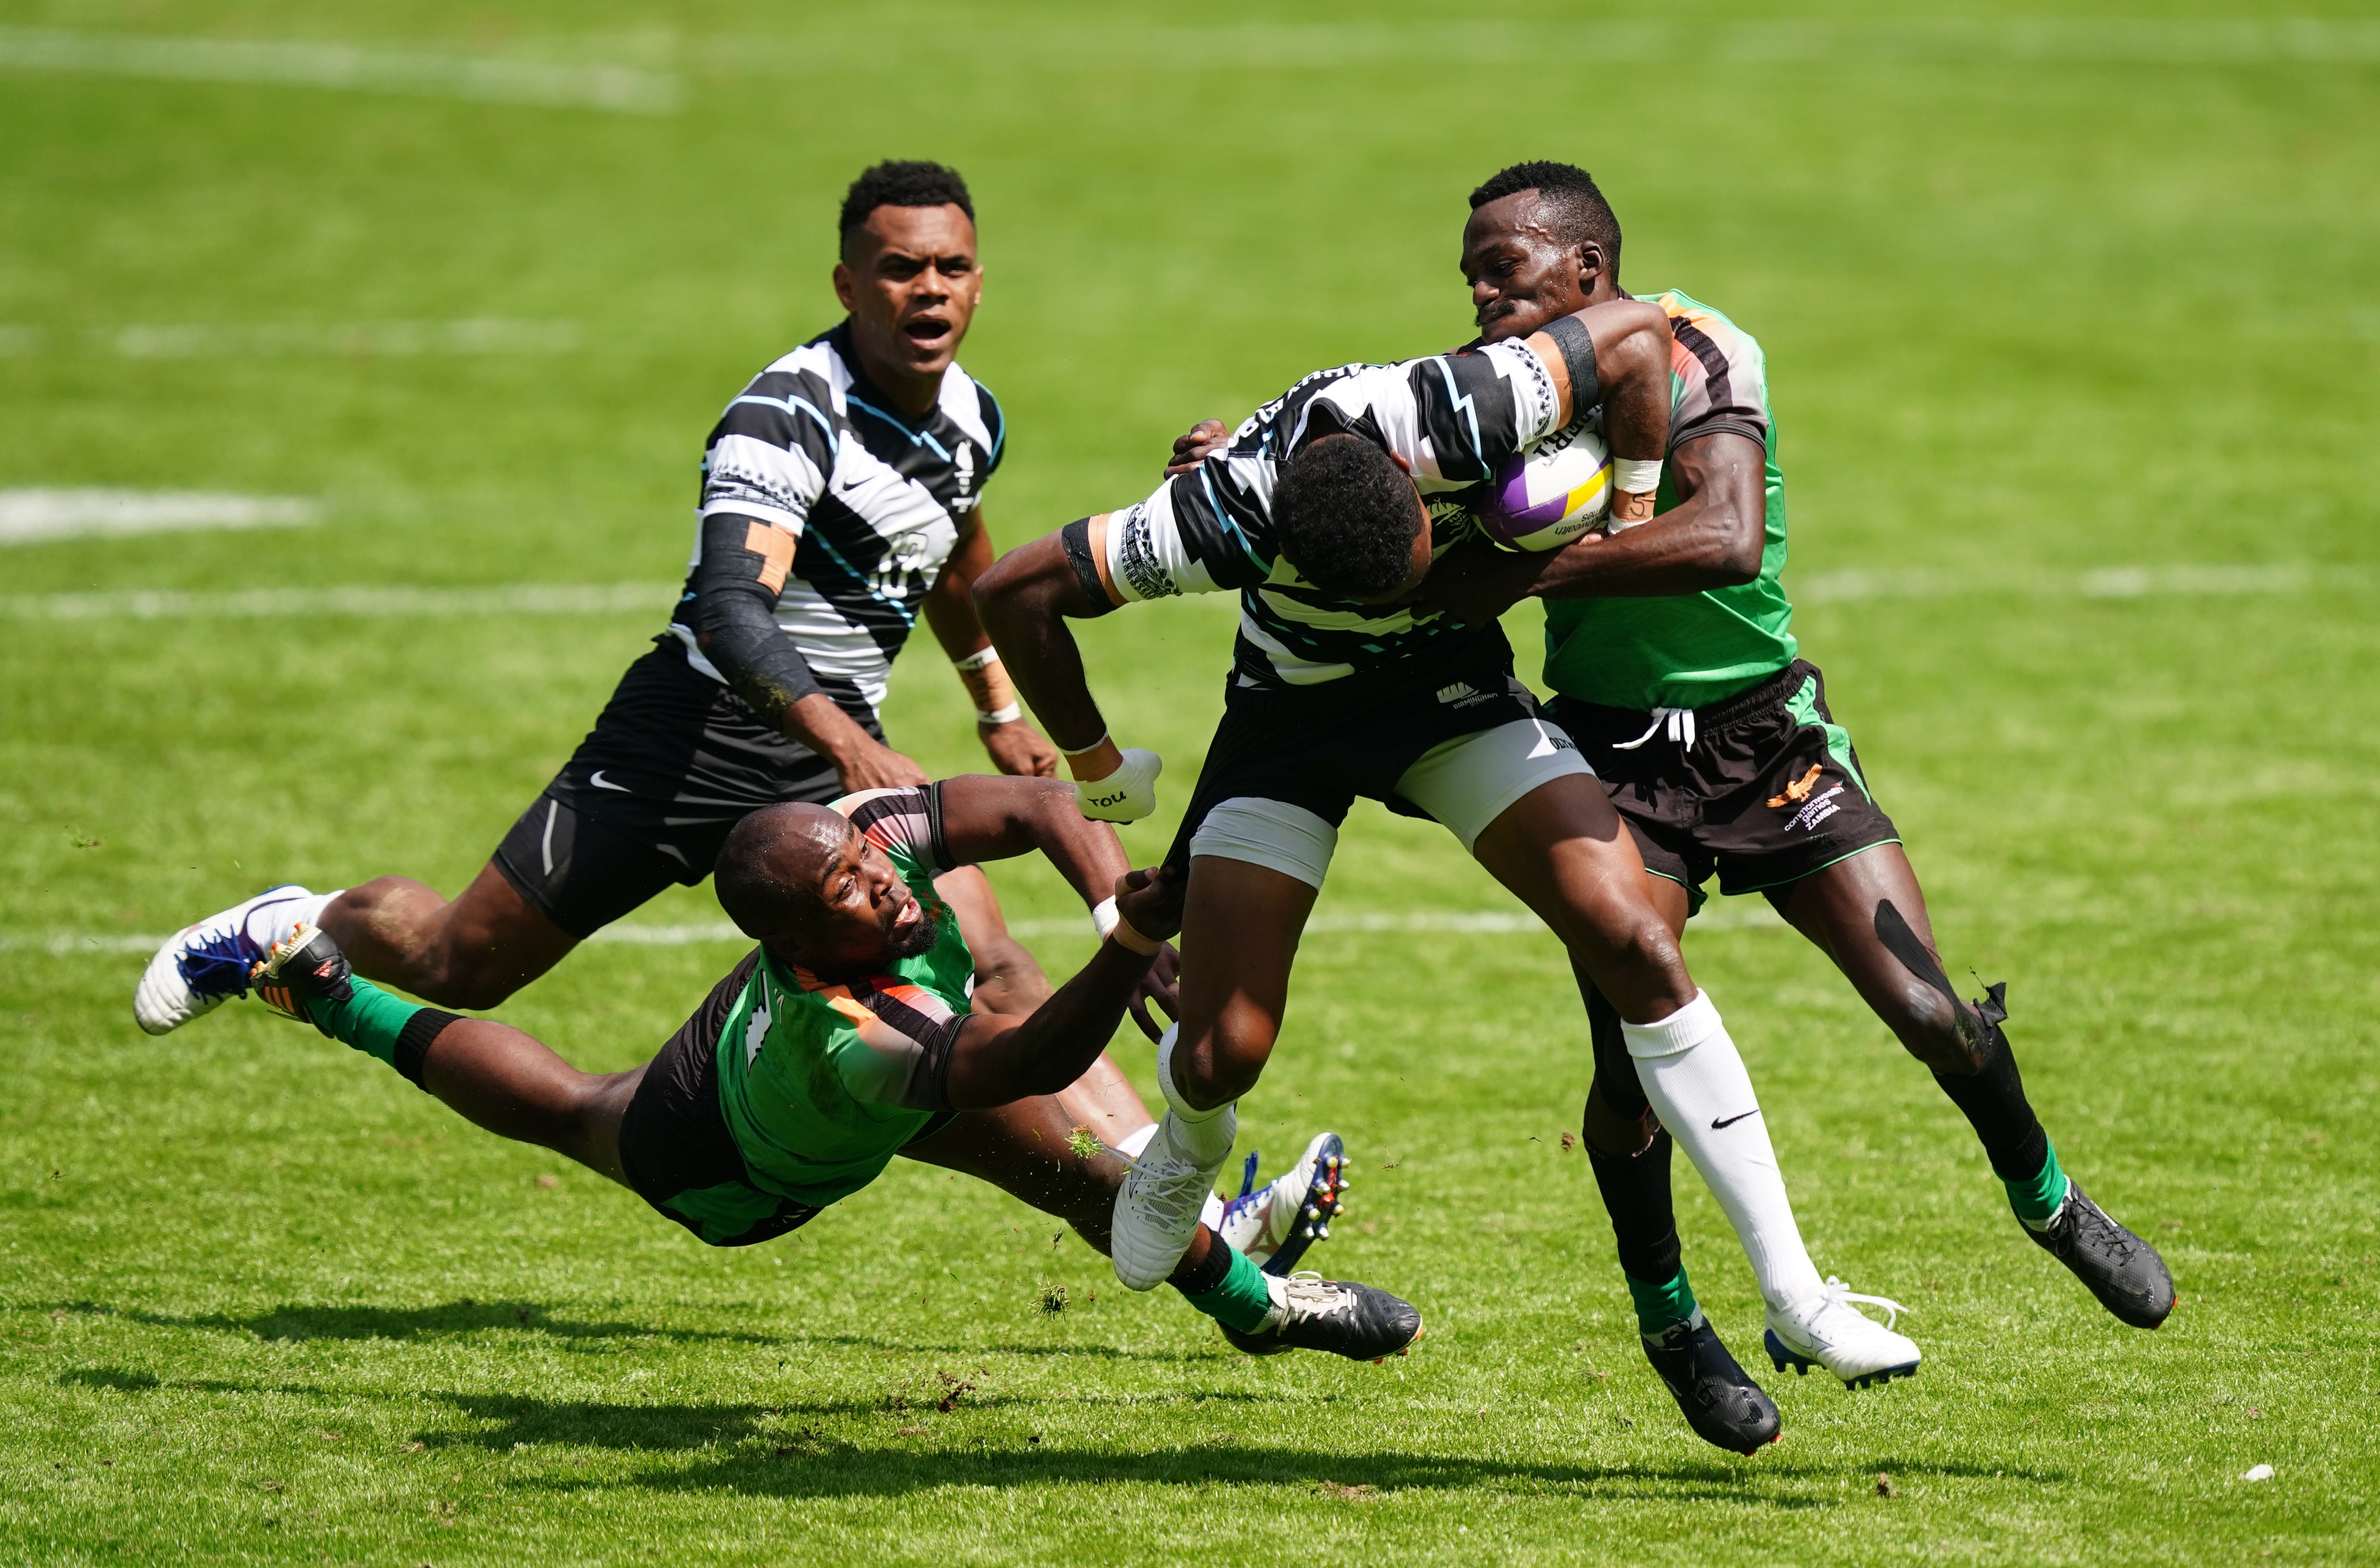 Fiji clashed with Zambia as the rugby sevens competition got under way in Coventry (Mike Egerton/PA)